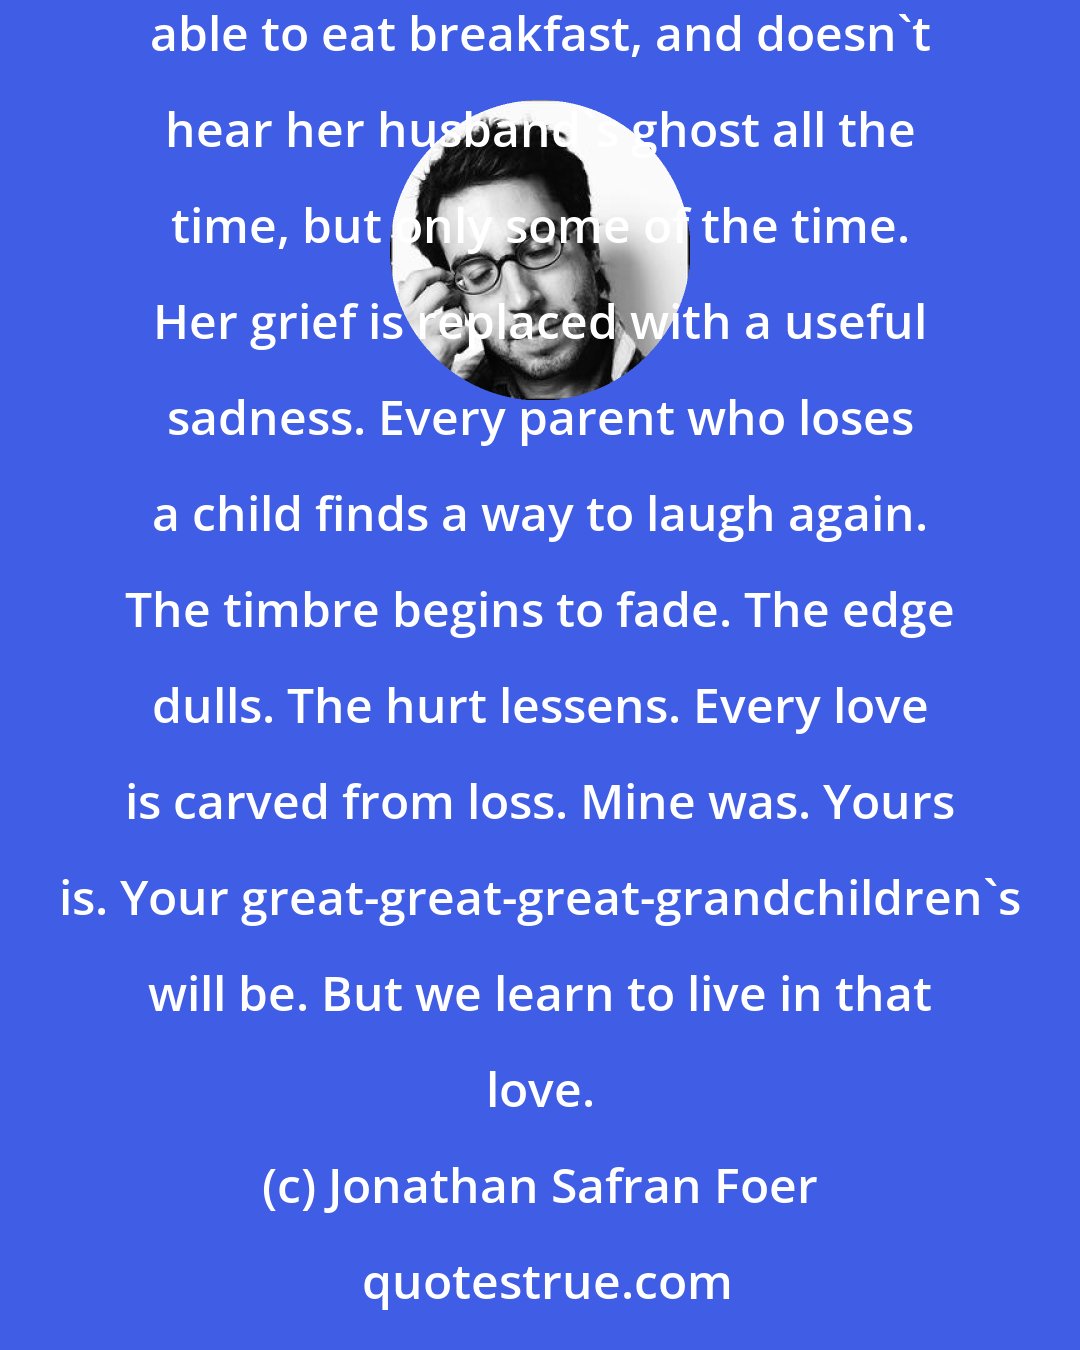 Jonathan Safran Foer: Every widow wakes one morning, perhaps after years of pure and unwavering grieving, to realize she slept a good night's sleep, and will be able to eat breakfast, and doesn't hear her husband's ghost all the time, but only some of the time. Her grief is replaced with a useful sadness. Every parent who loses a child finds a way to laugh again. The timbre begins to fade. The edge dulls. The hurt lessens. Every love is carved from loss. Mine was. Yours is. Your great-great-great-grandchildren's will be. But we learn to live in that love.